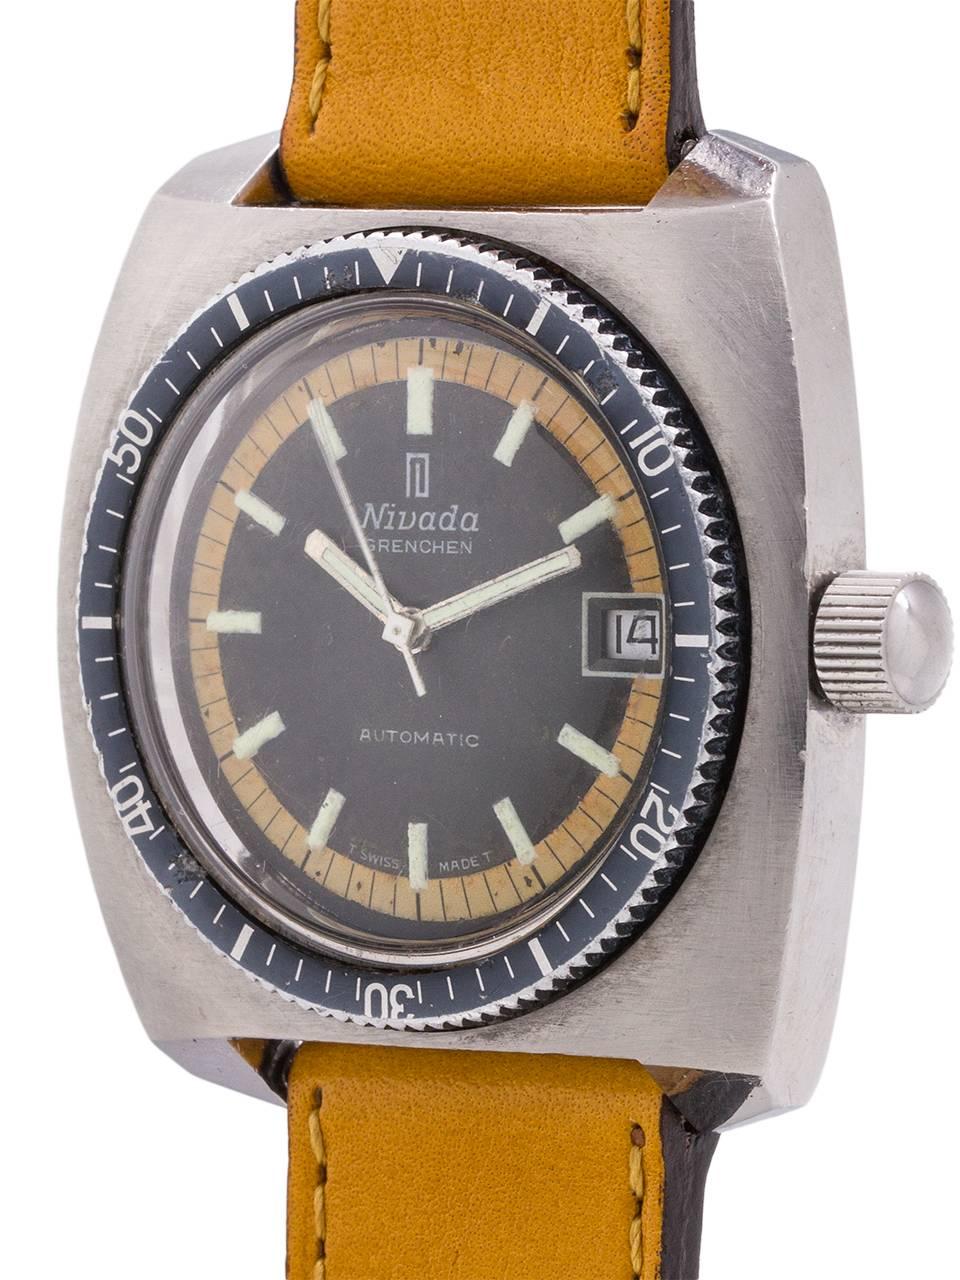 
Great looking Nivada Grenchen diver’s model circa 1960’s. Featuring a 39 x 42mm cushion shaped case with raised elapsed time bezel, and acrylic dome crystal. With original black dial with aged yellow minute track and tritium indexes and silver